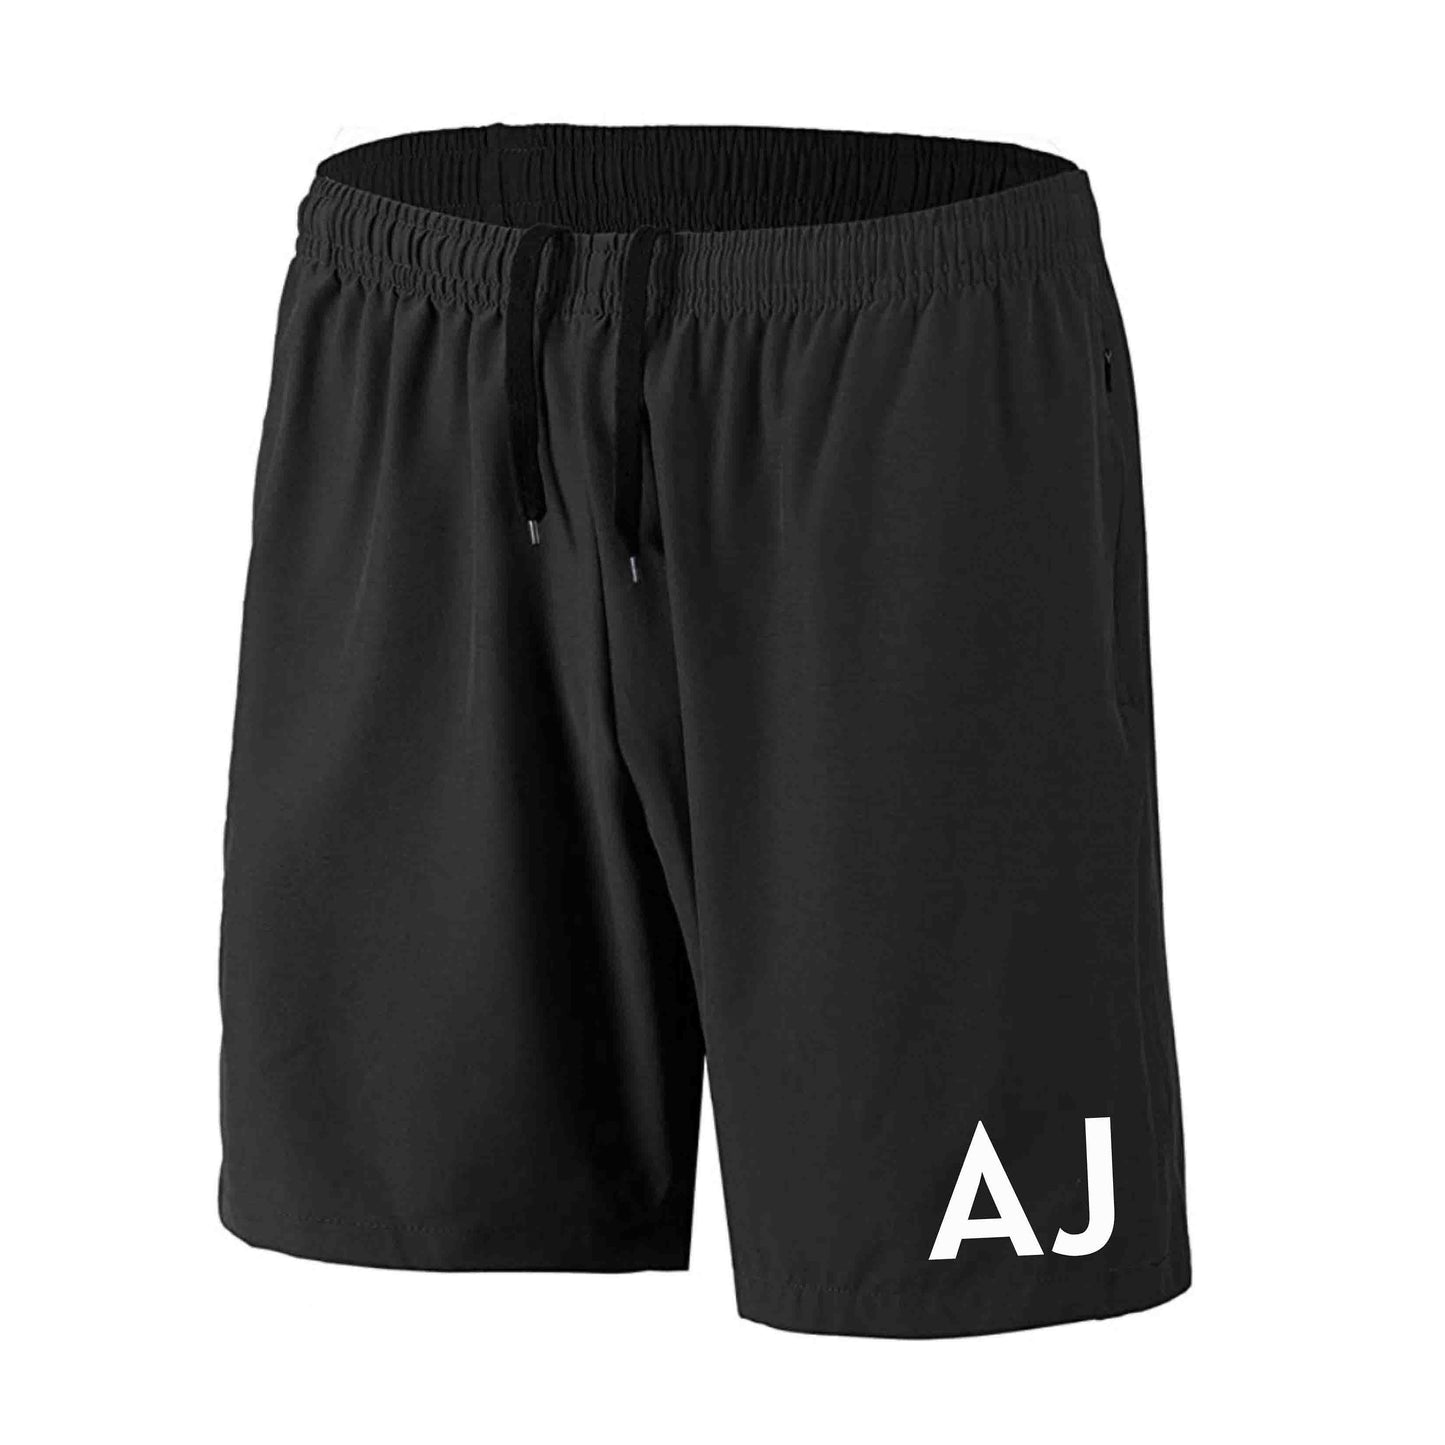 Nutcase Personalized Workout Shorts for Boy Black  Initials Nutcase